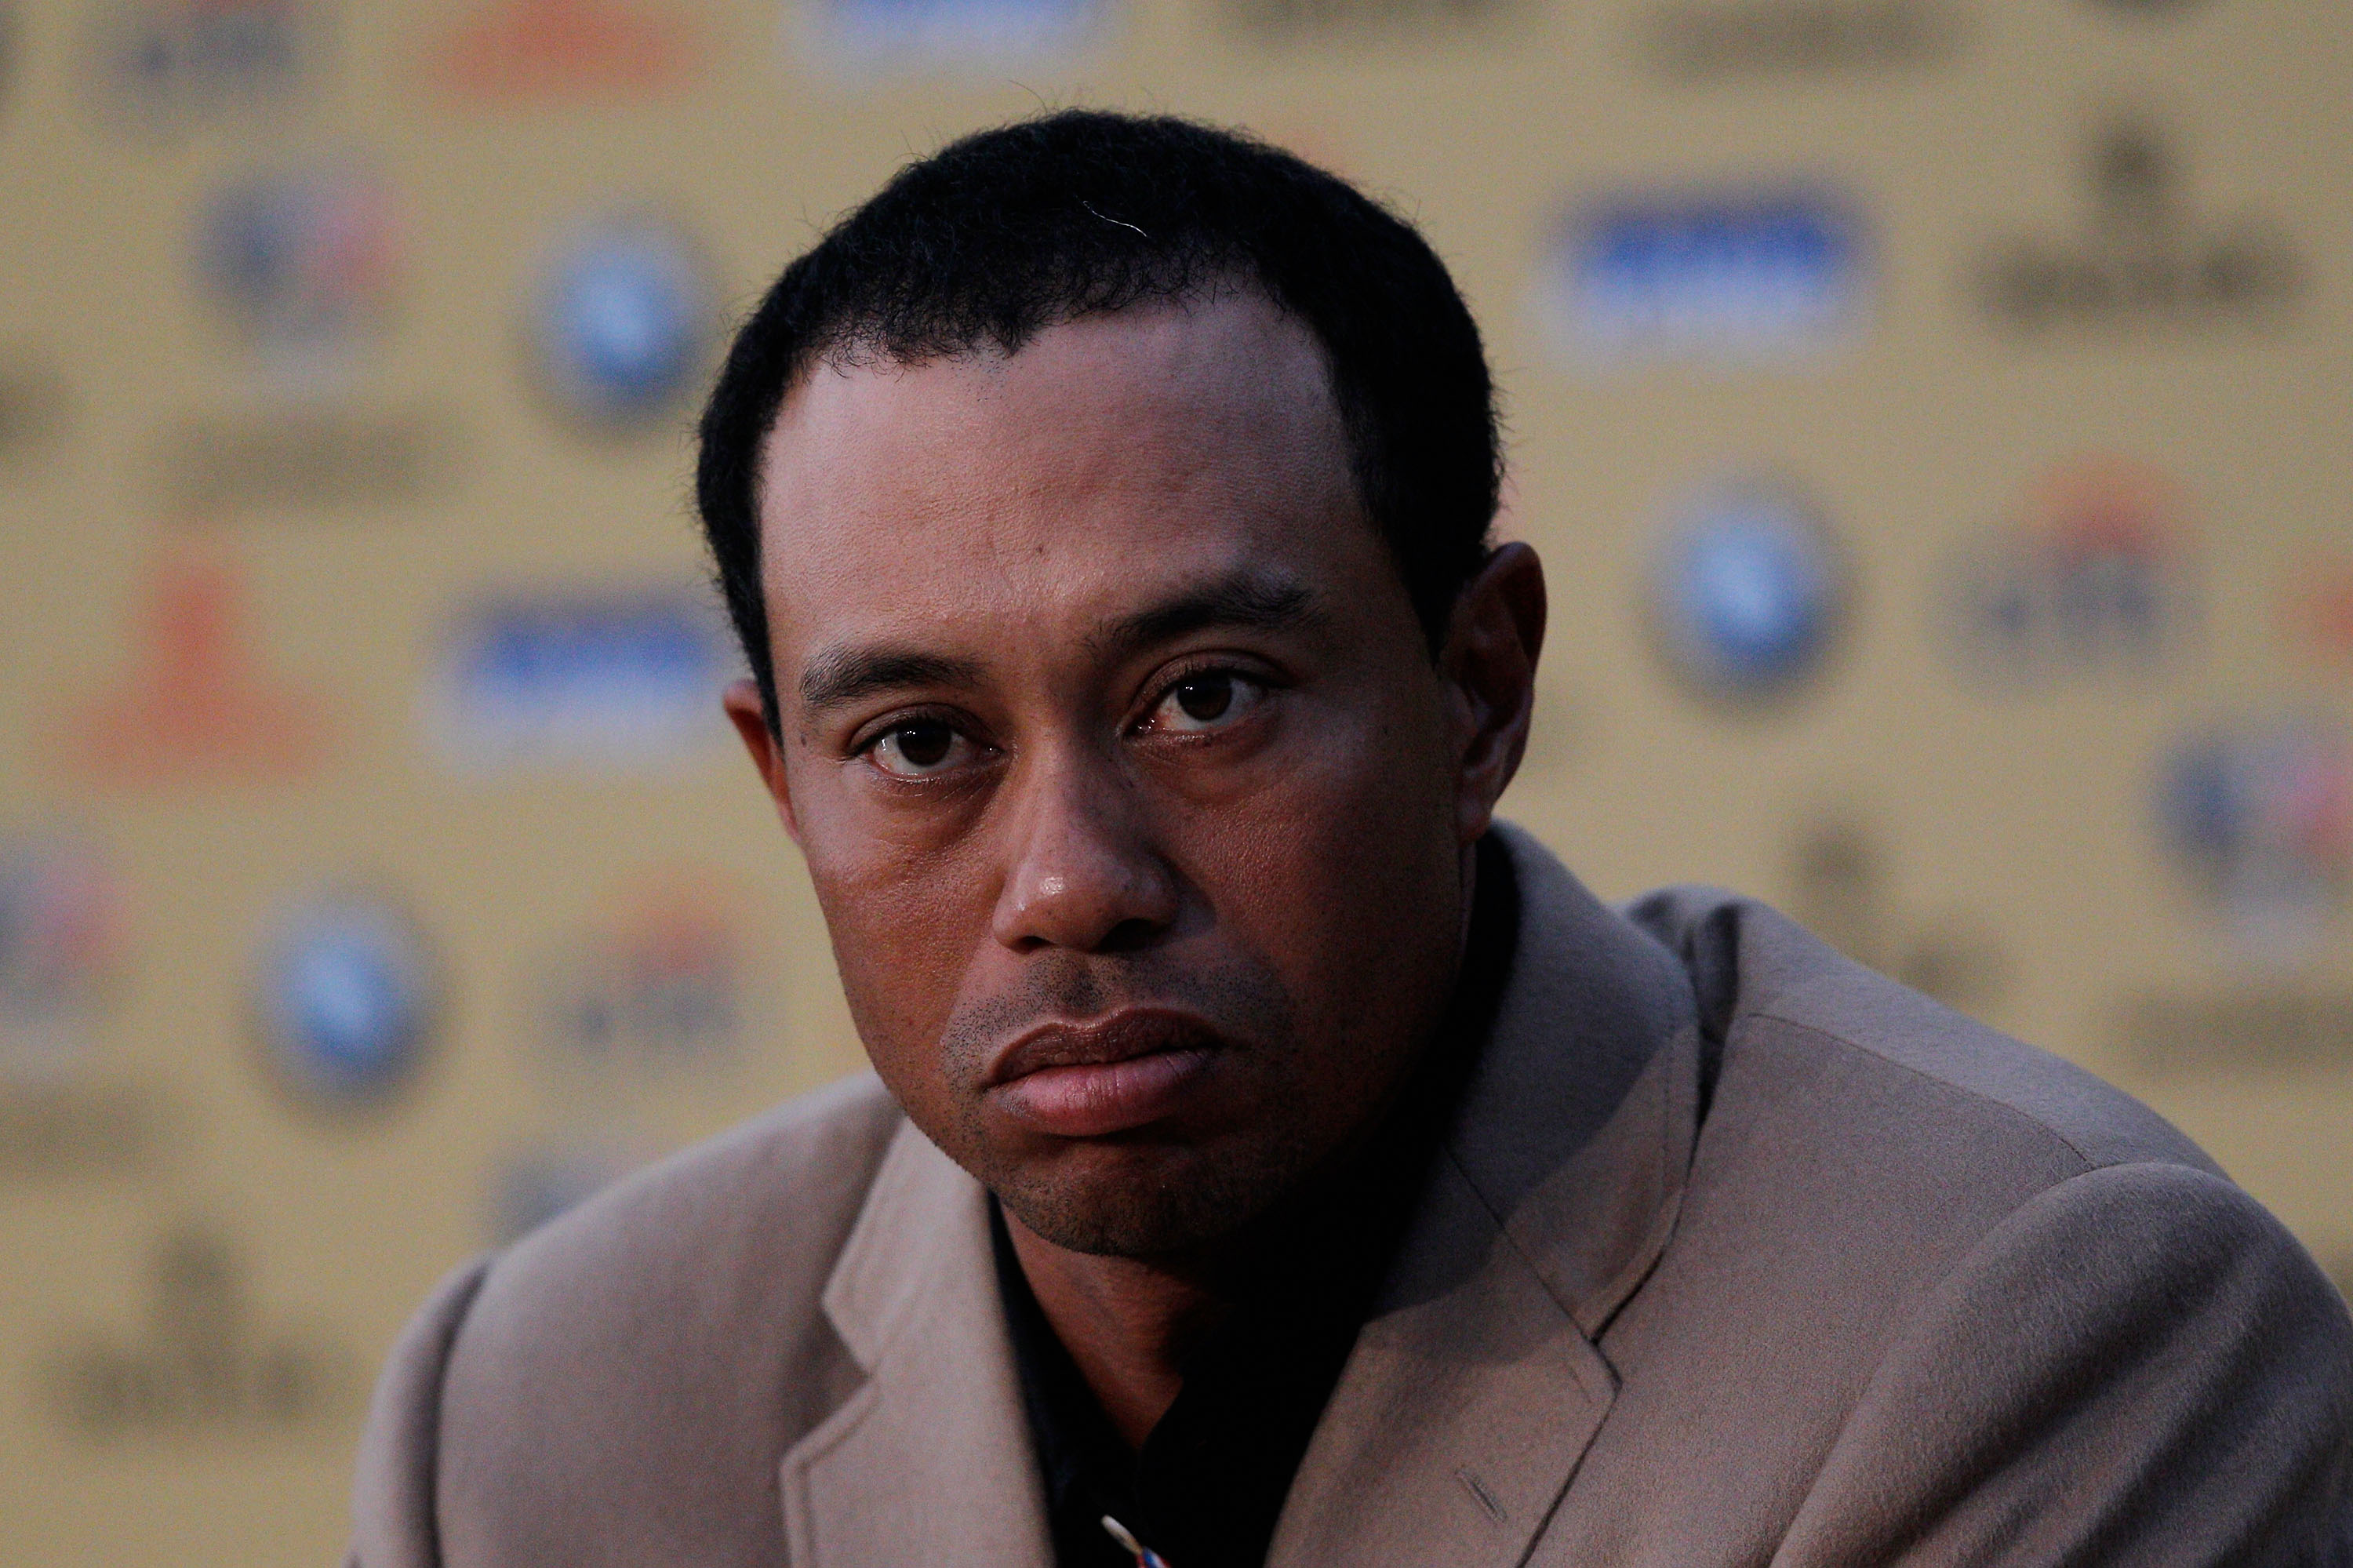 NEWPORT, WALES - OCTOBER 04:  Tiger Woods of Team USA attends a press conference following Europe's 14.5 to 13.5 victory over the USA at the 2010 Ryder Cup at the Celtic Manor Resort on October 4, 2010 in Newport, Wales.  (Photo by Sam Greenwood/Getty Ima